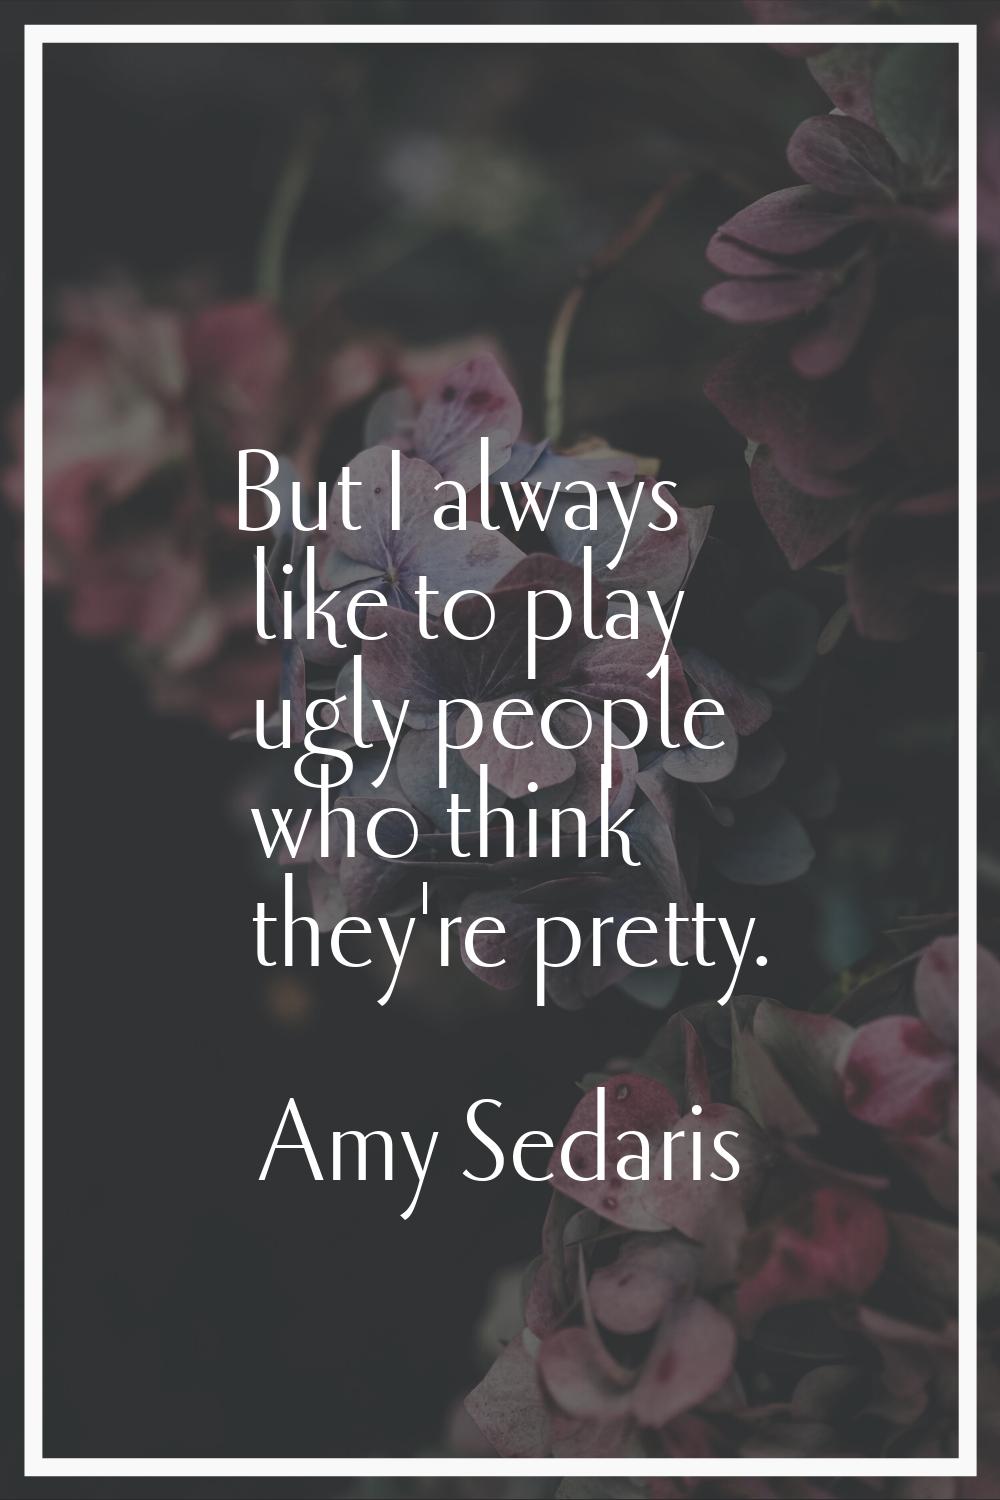 But I always like to play ugly people who think they're pretty.